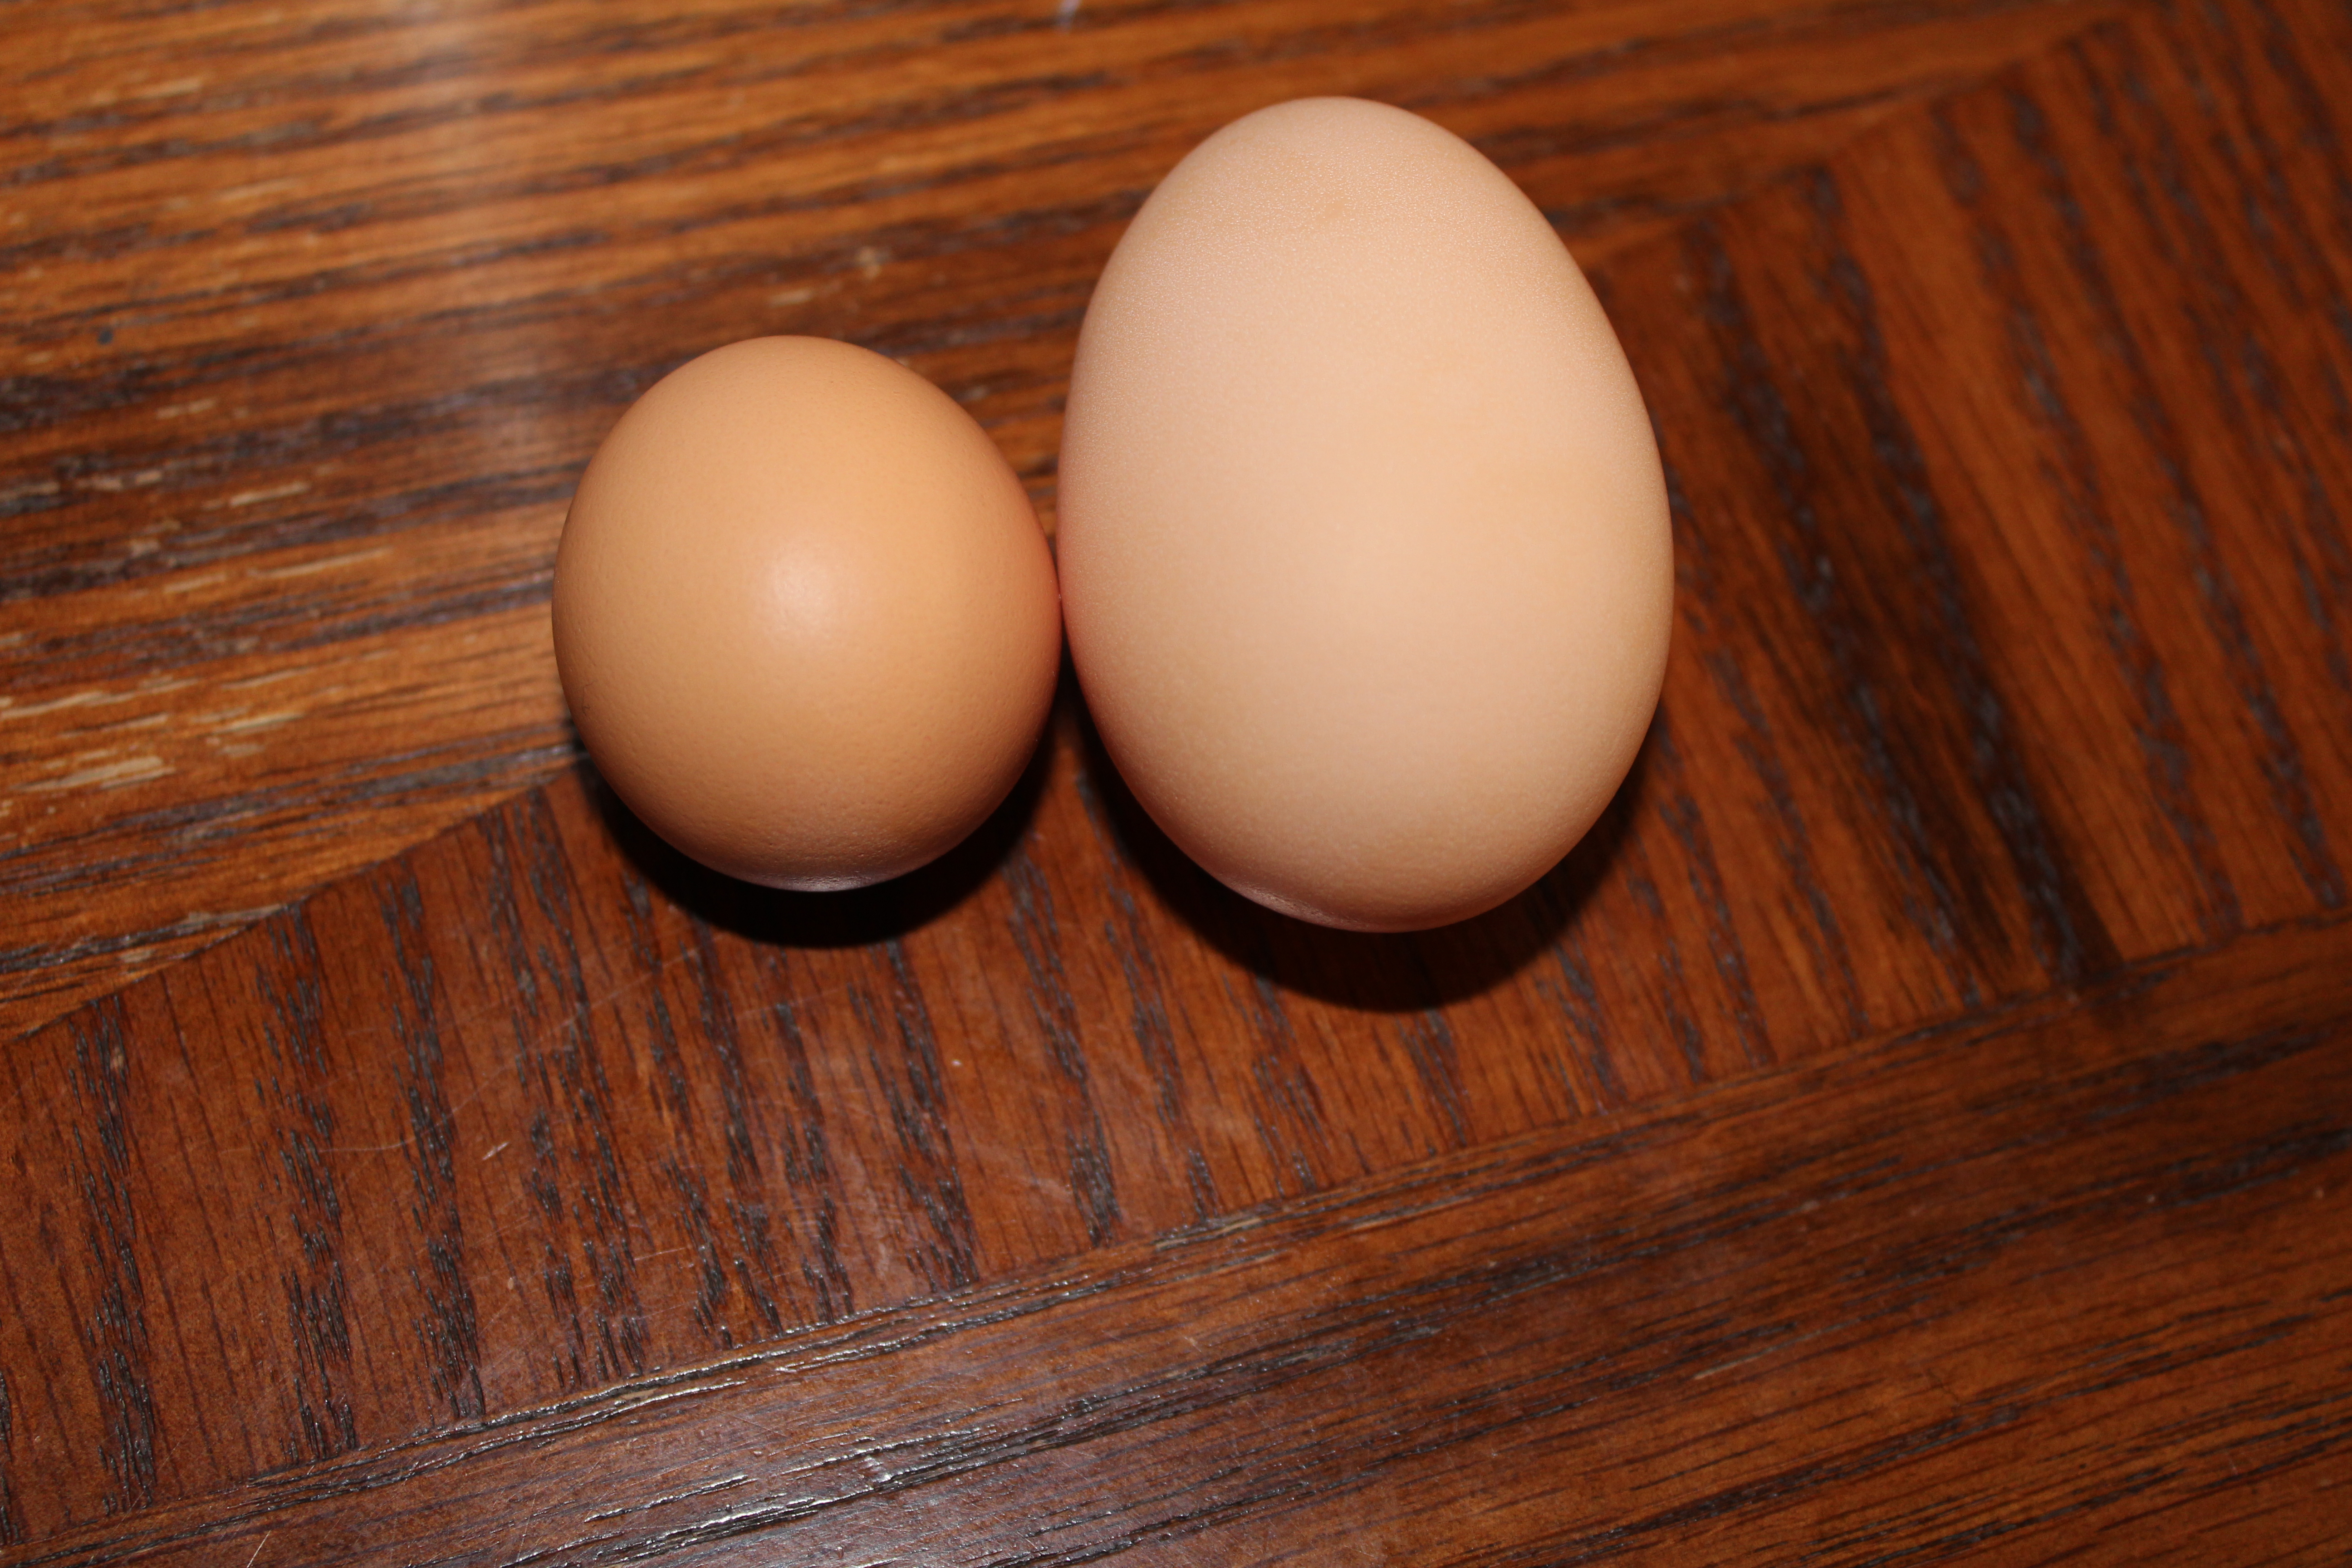 What our pullet egg looked like, then a double yolker from our